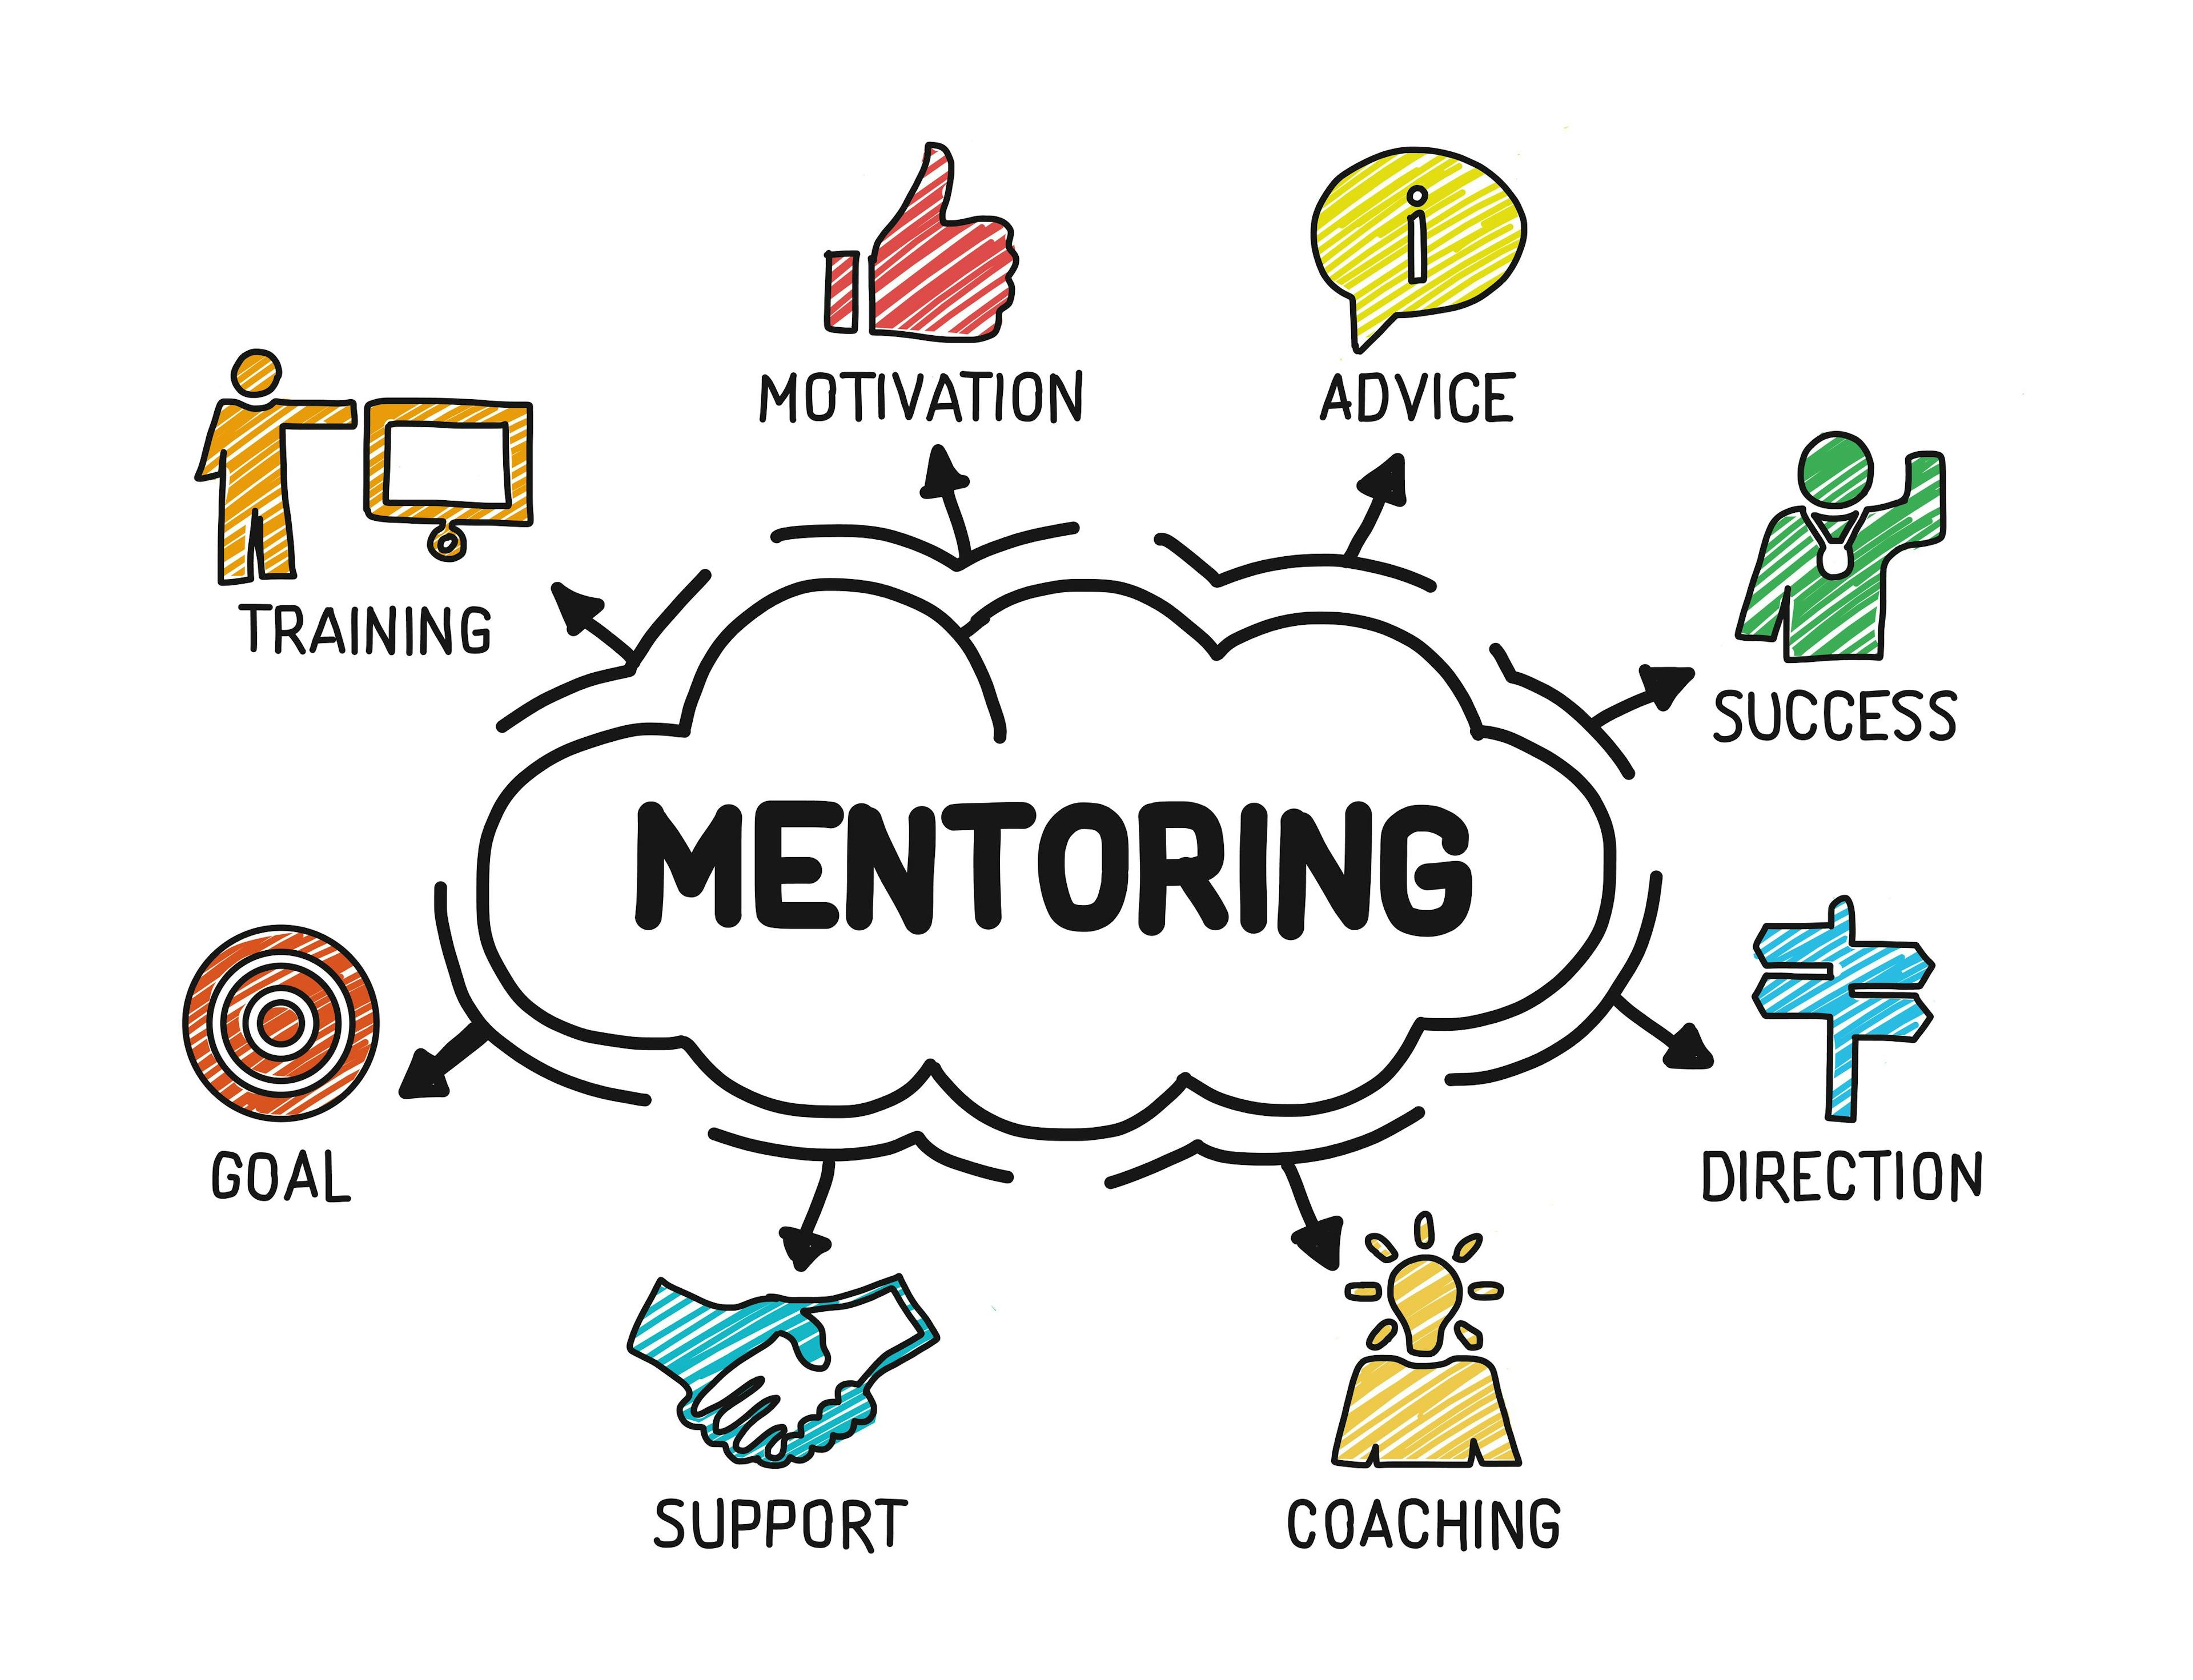 Mentoring for better personal health